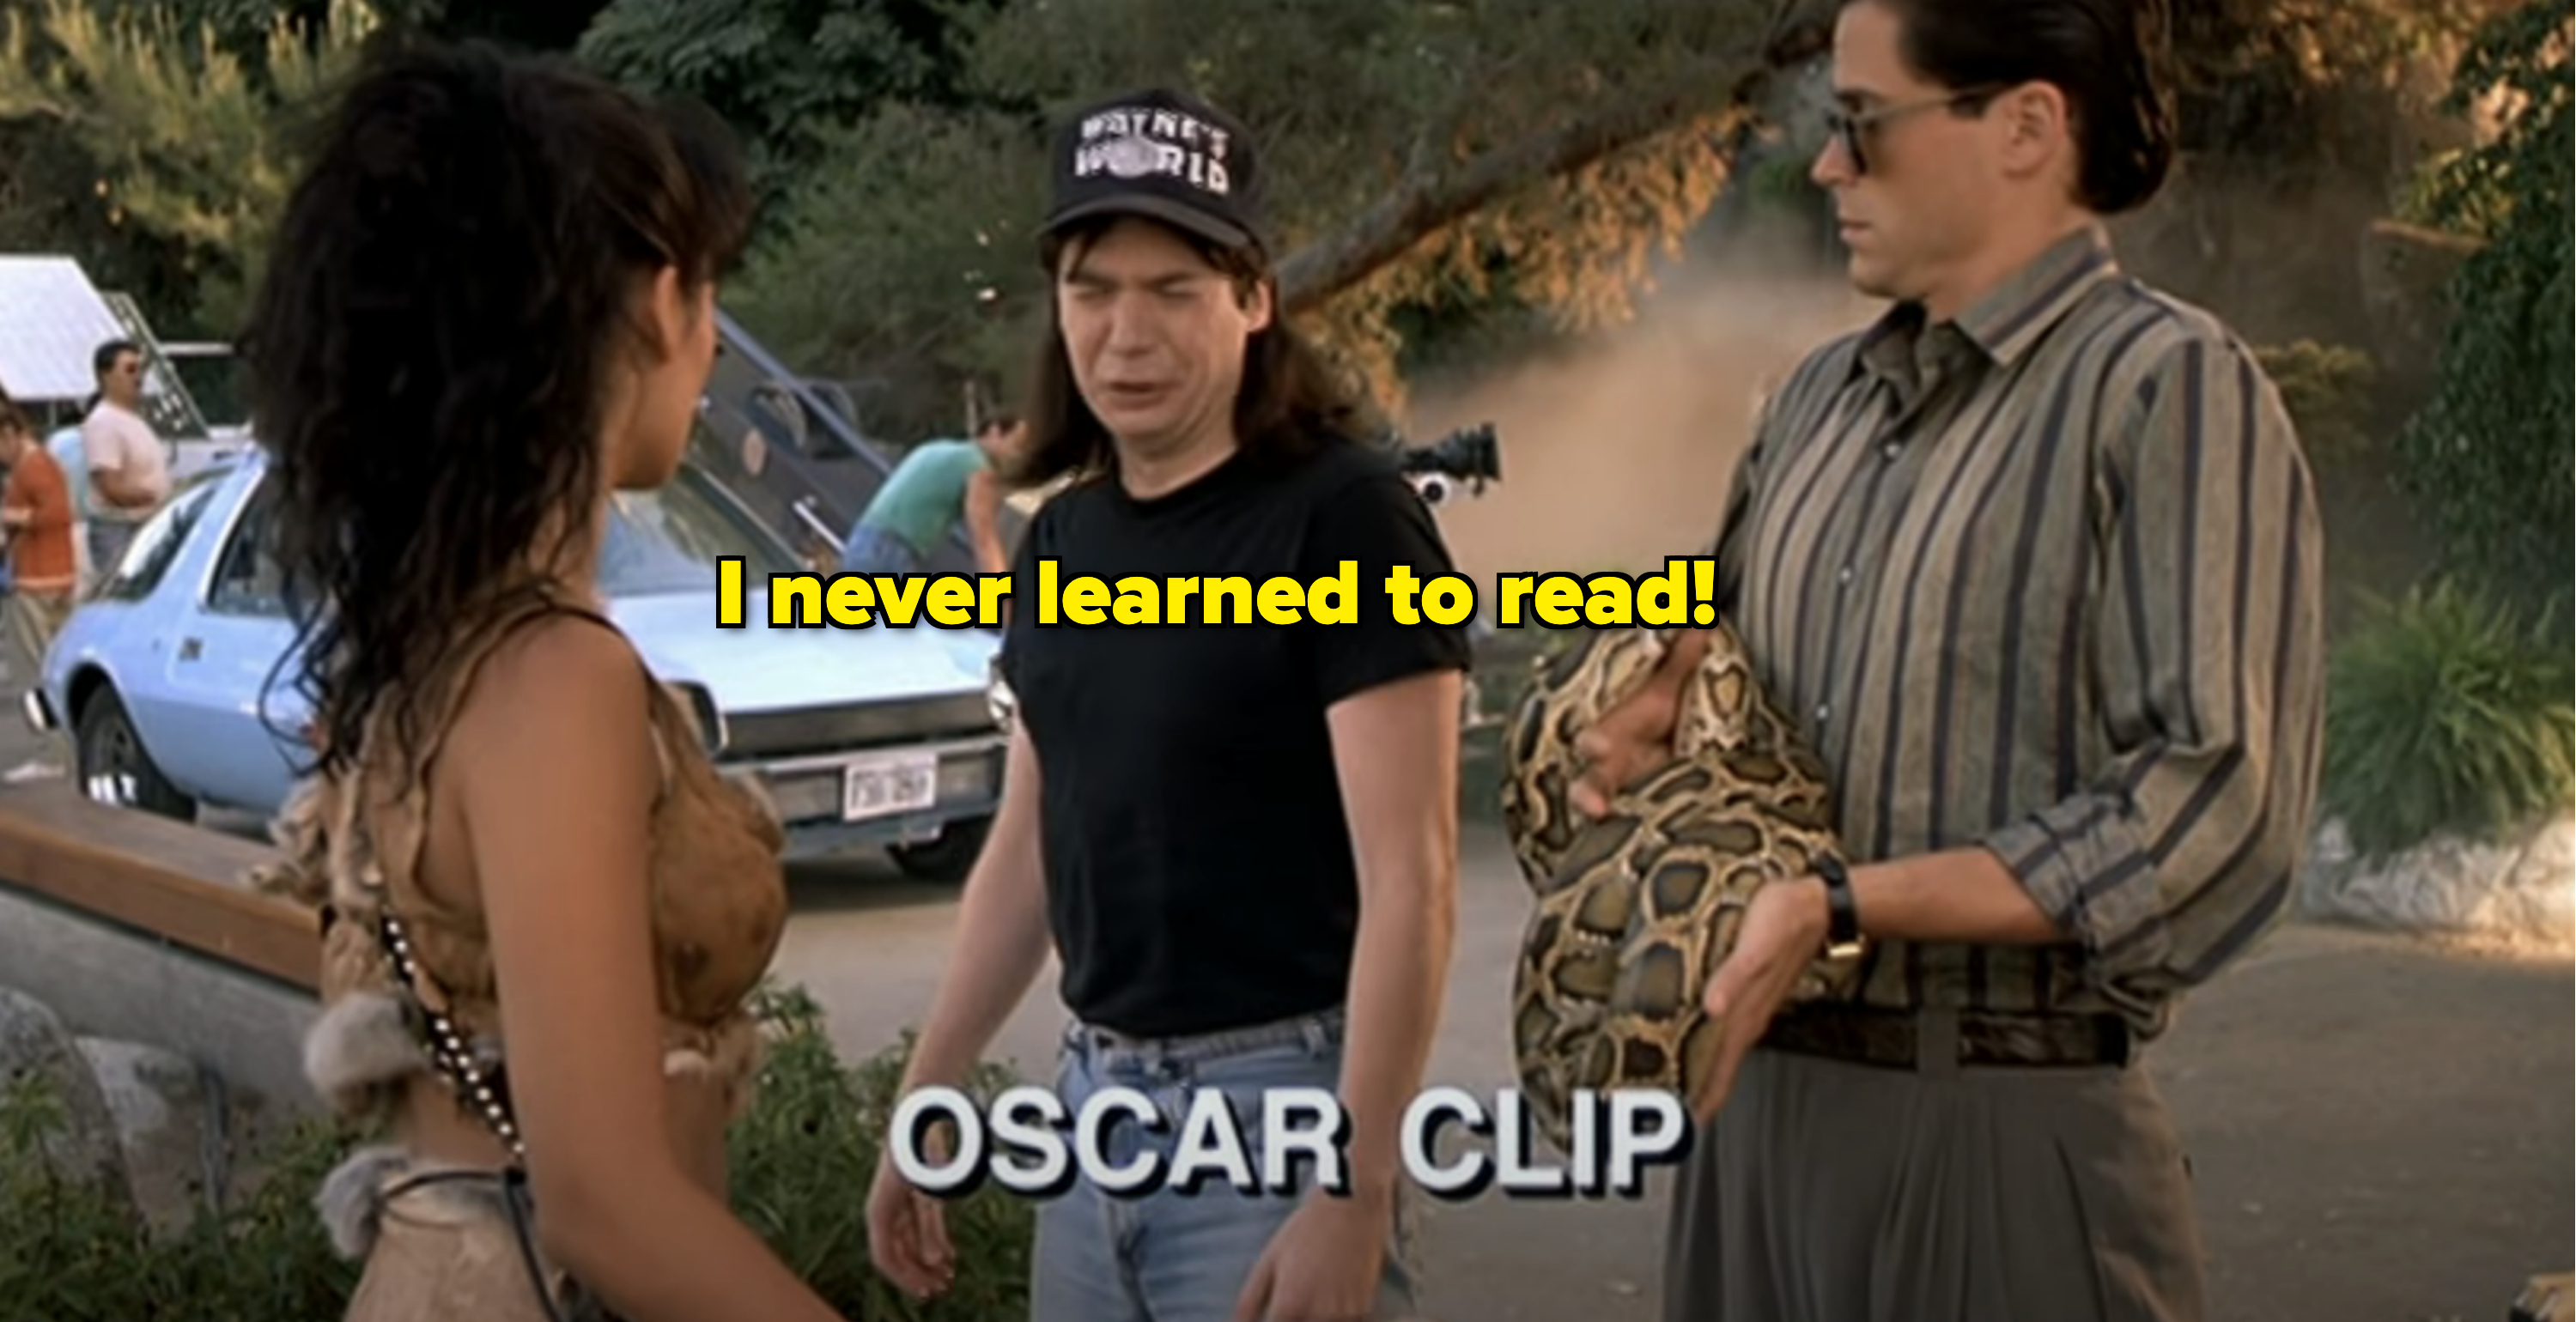 &quot;I never learned to read!&quot;